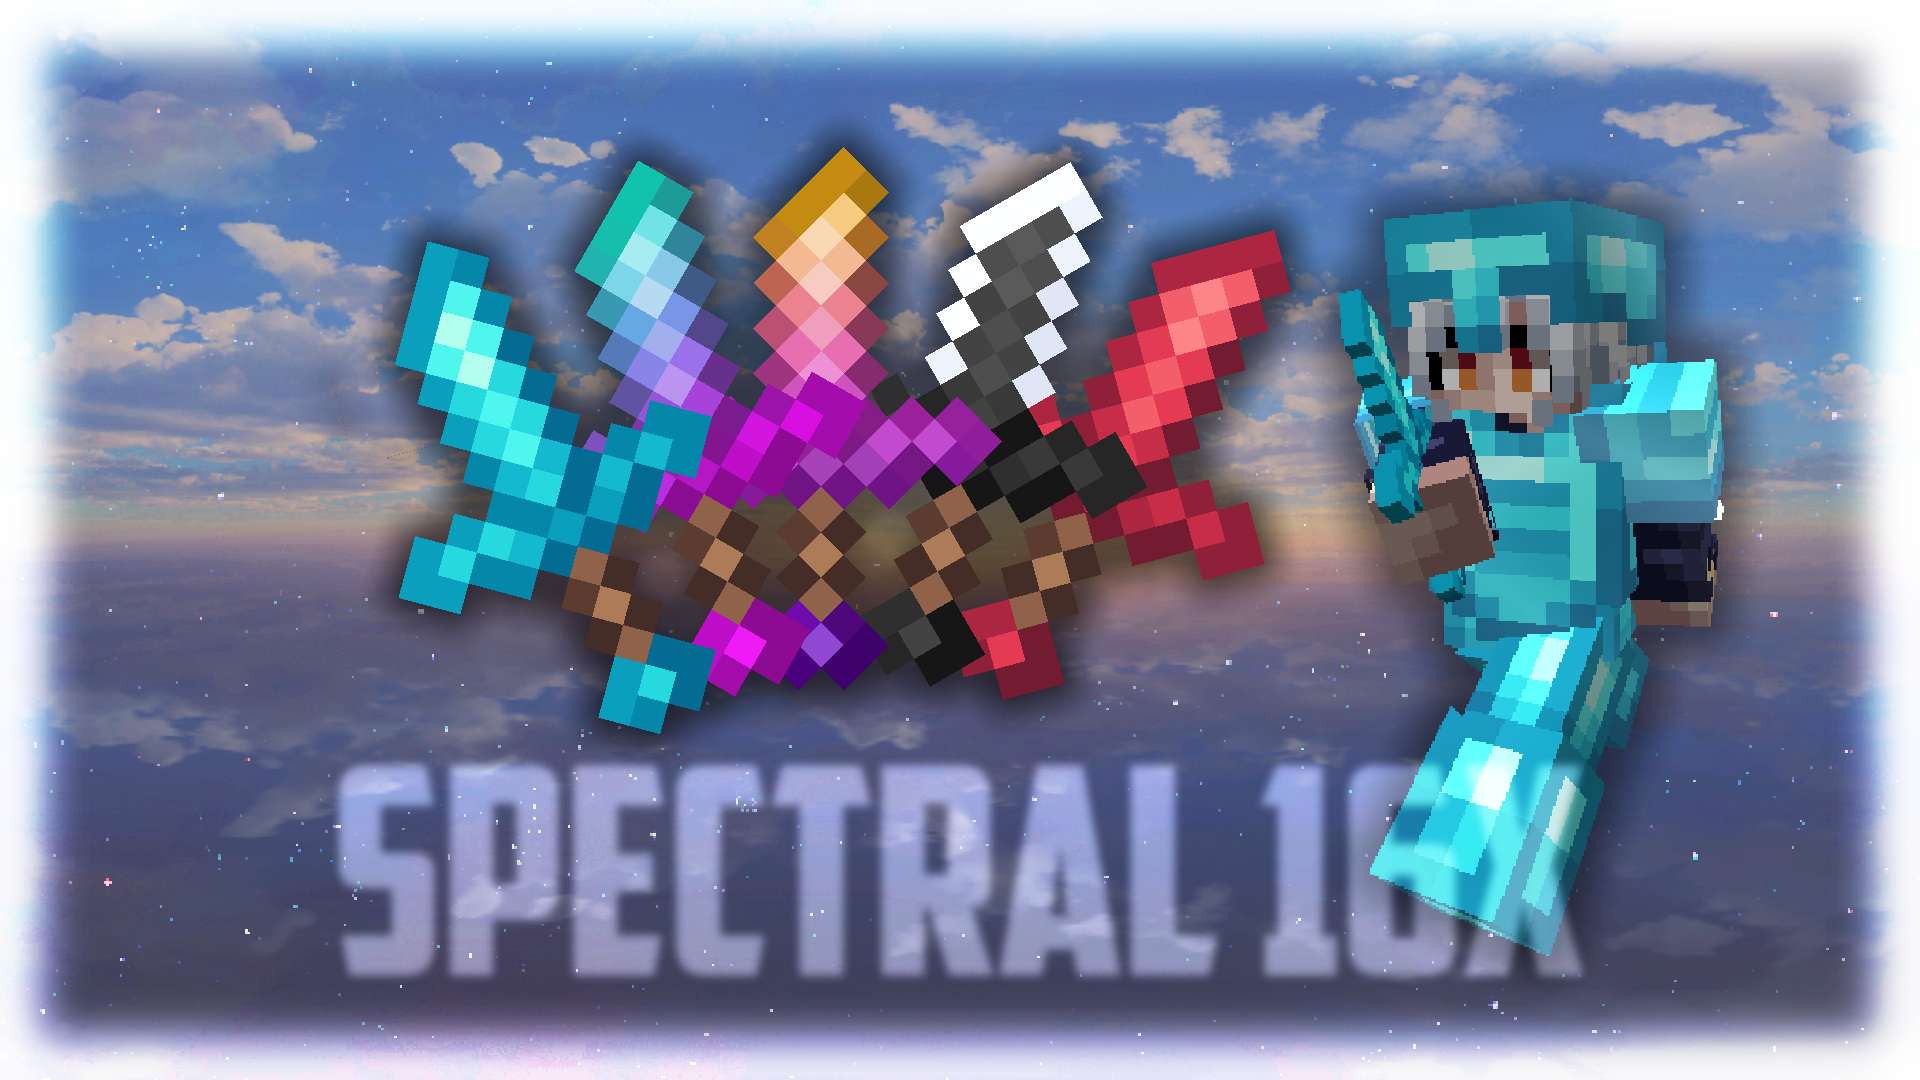 Spectral - Teal 16x by Zlax on PvPRP